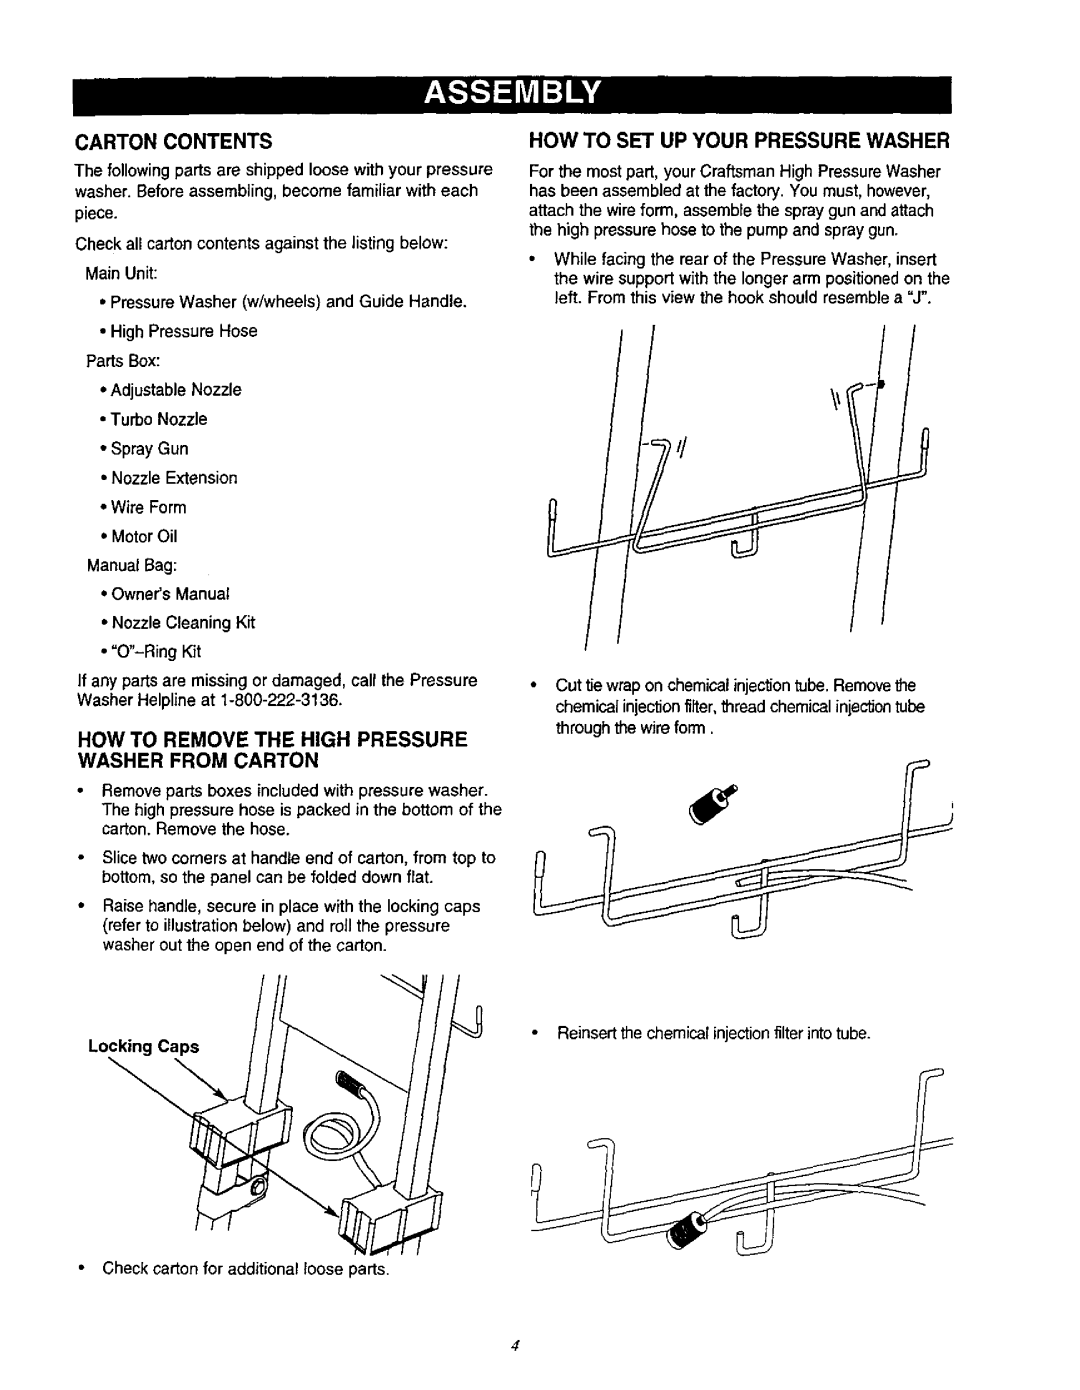 Craftsman 580.76201 owner manual How To Set Up Your Pressure Washer, Carton Contents, Main Unit, Wire Form, O-Ring Kit 